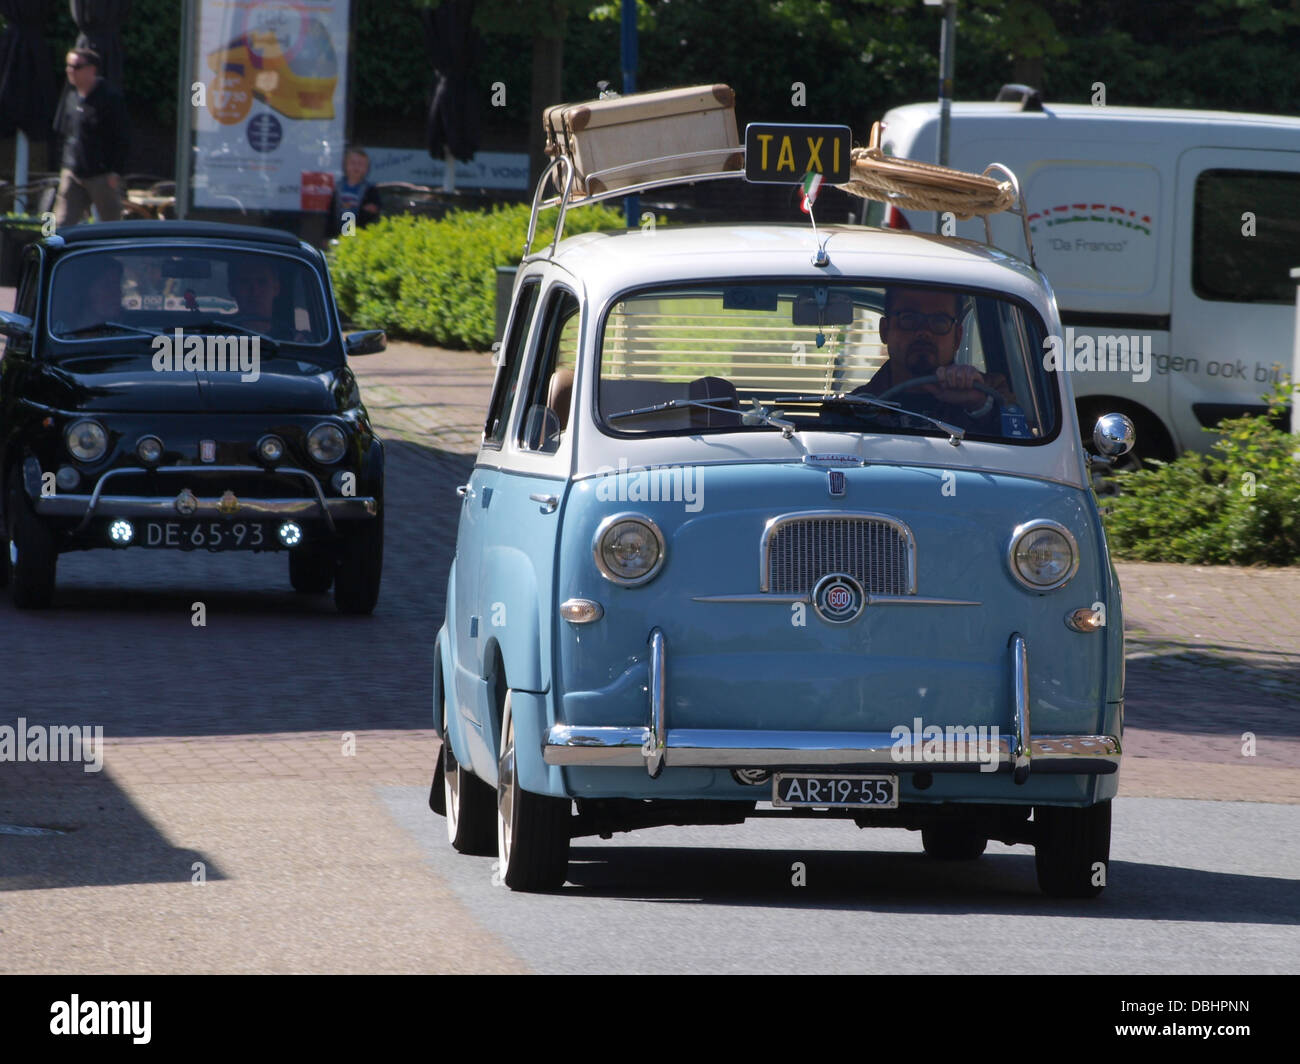 1957 FIAT Multipla Taxi and FIAT 500 1 Stock Photo